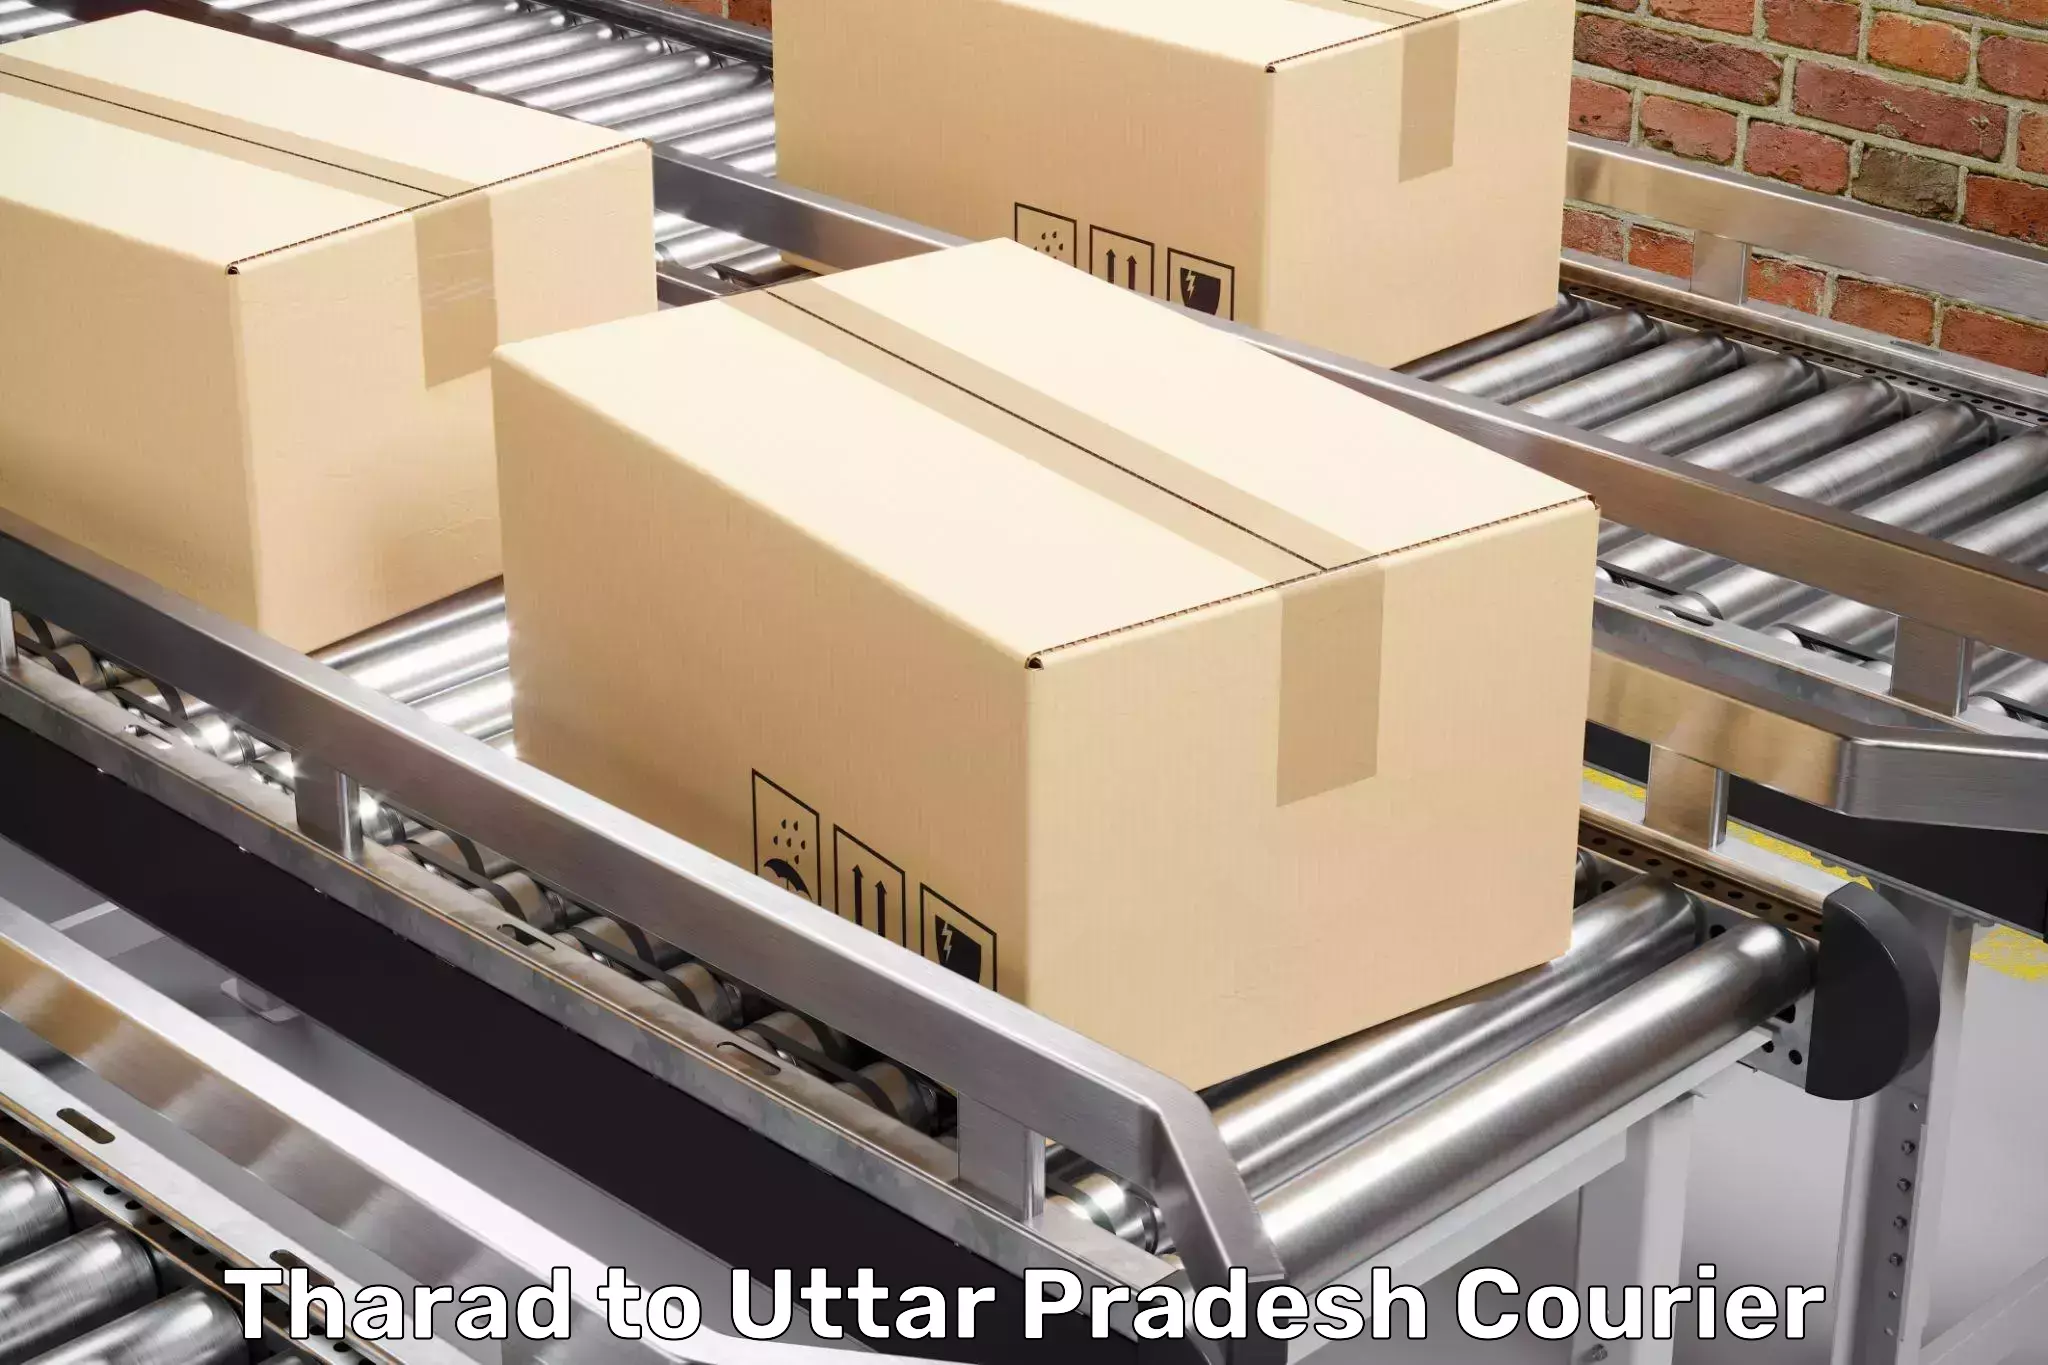 Furniture delivery service Tharad to Naugarh